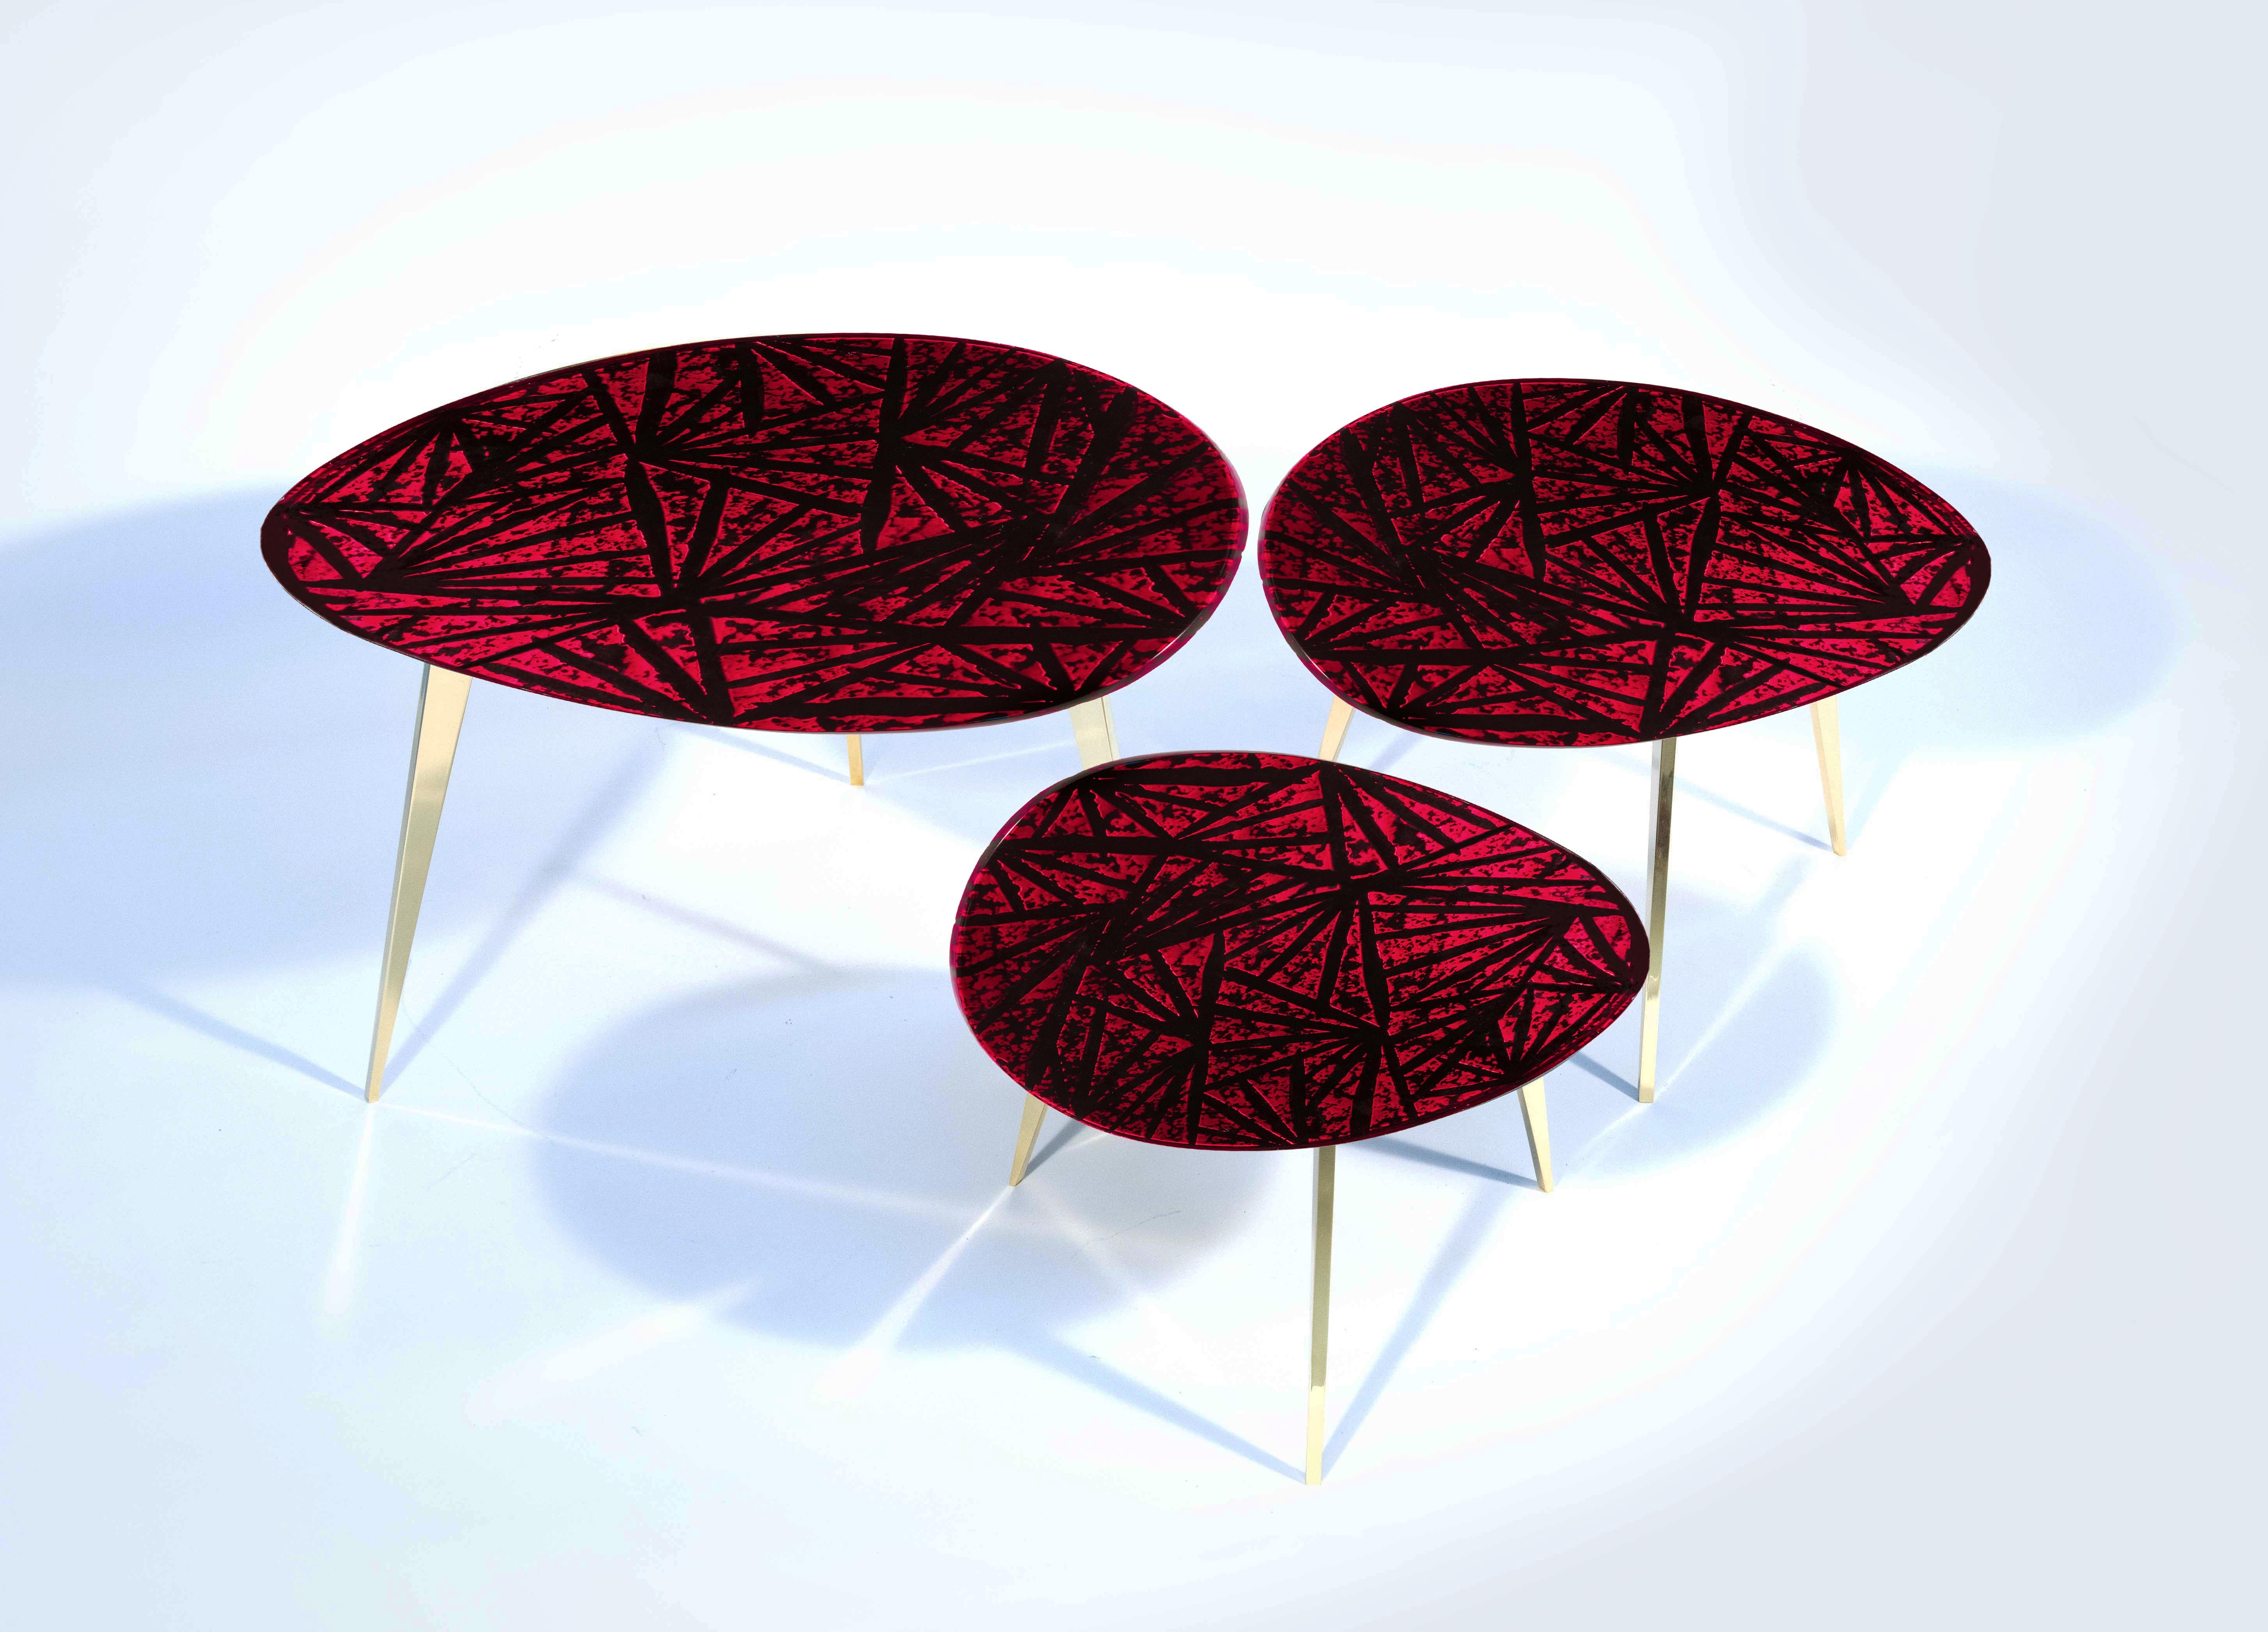 Modern Contemporary 'Rubino' Coffee Table Crystal and Brass Medium Size by Ghirò Studio For Sale